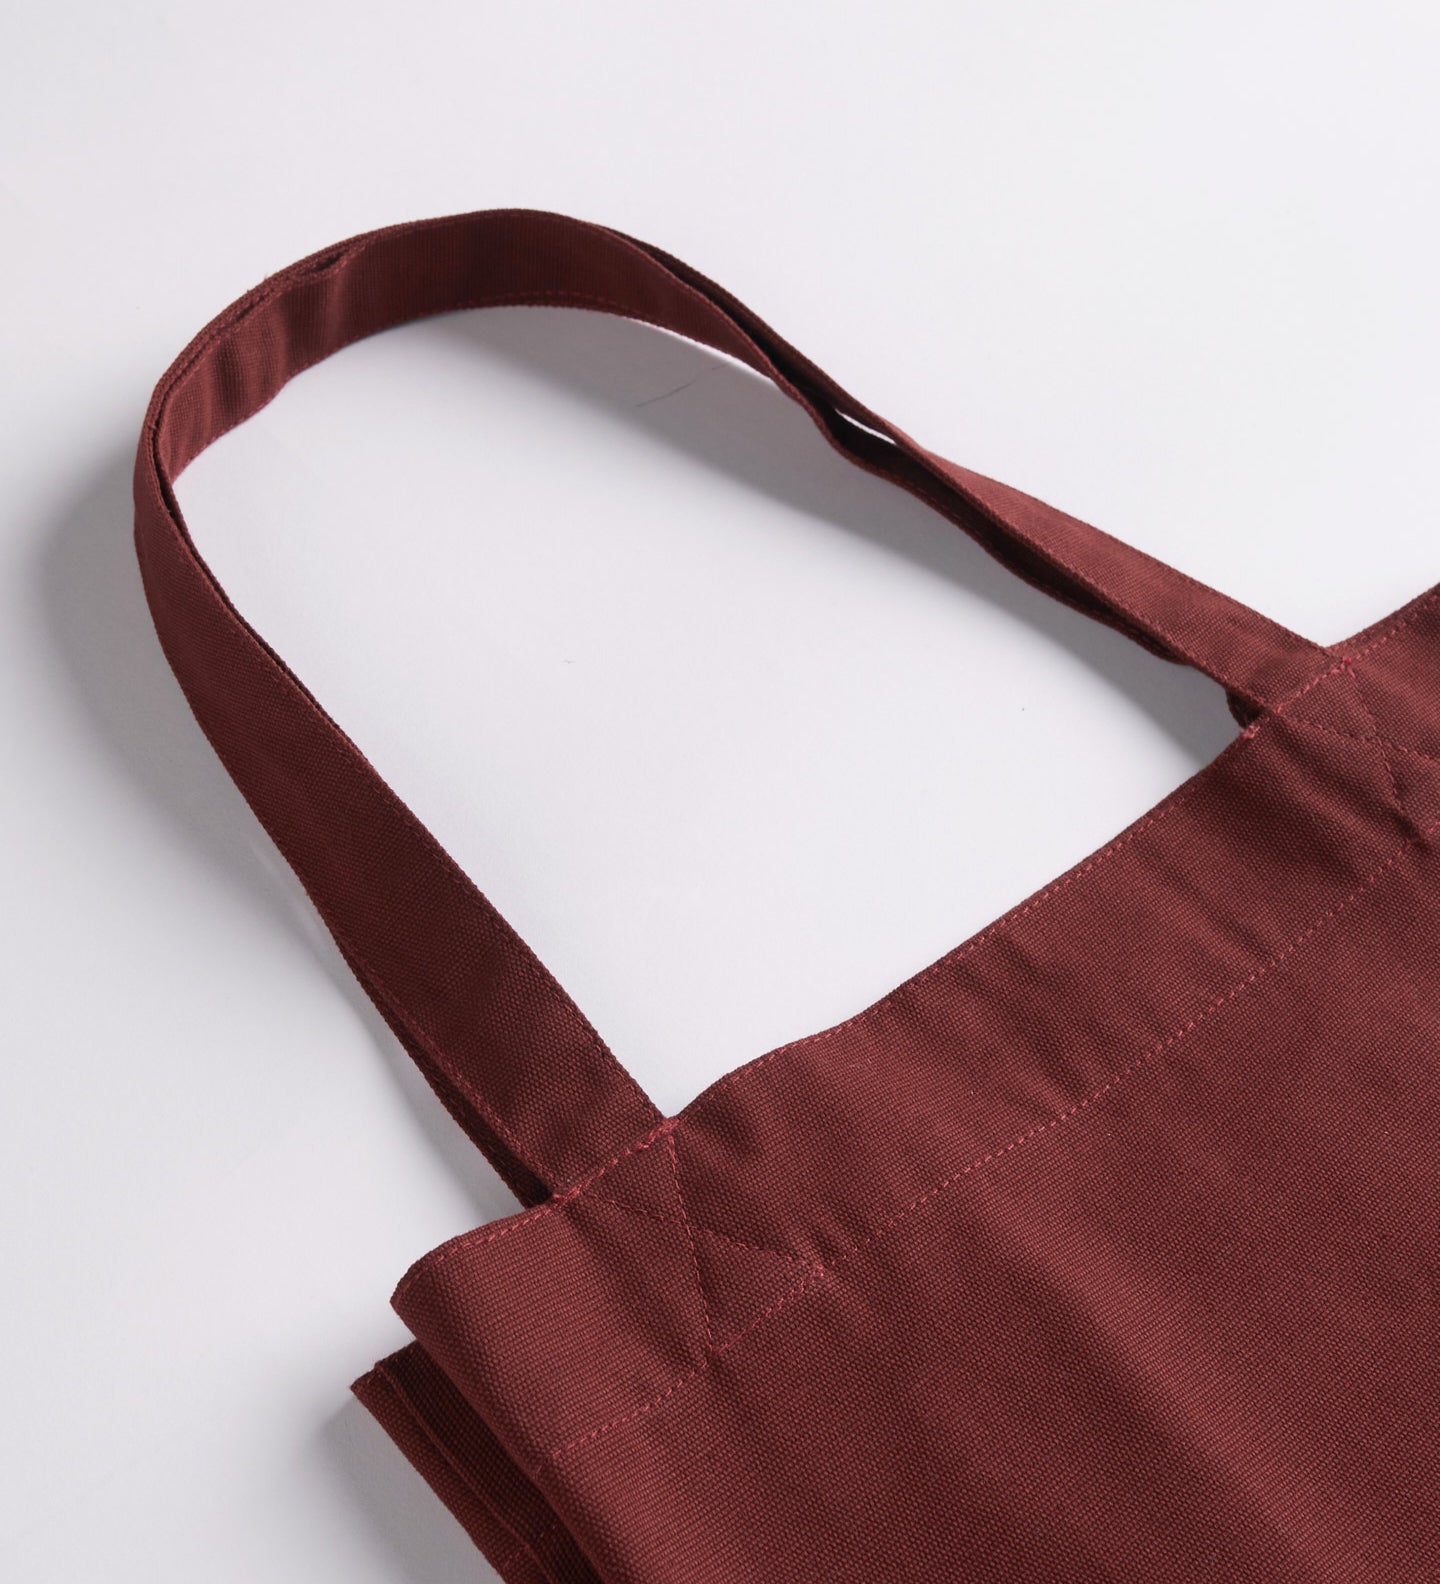 Close-up view of Uskees #4002 small tote bag in merlot-red with focus on the robust, twin carry handles.